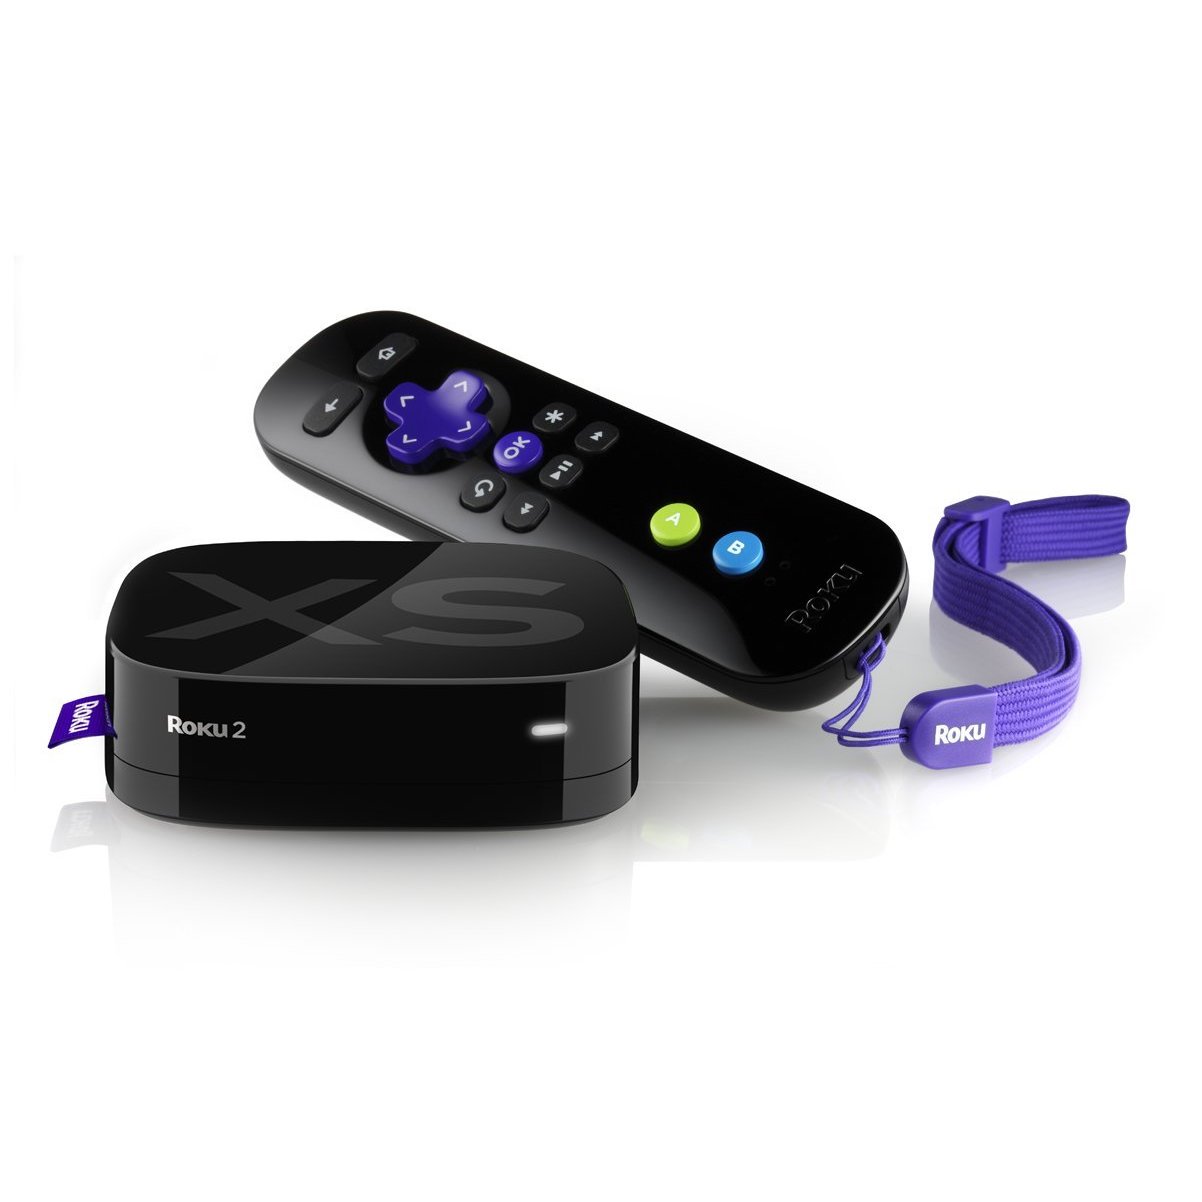 http://thetechjournal.com/wp-content/uploads/images/1108/1313556667-roku-2-xs-streaming-player-1080-1.jpg